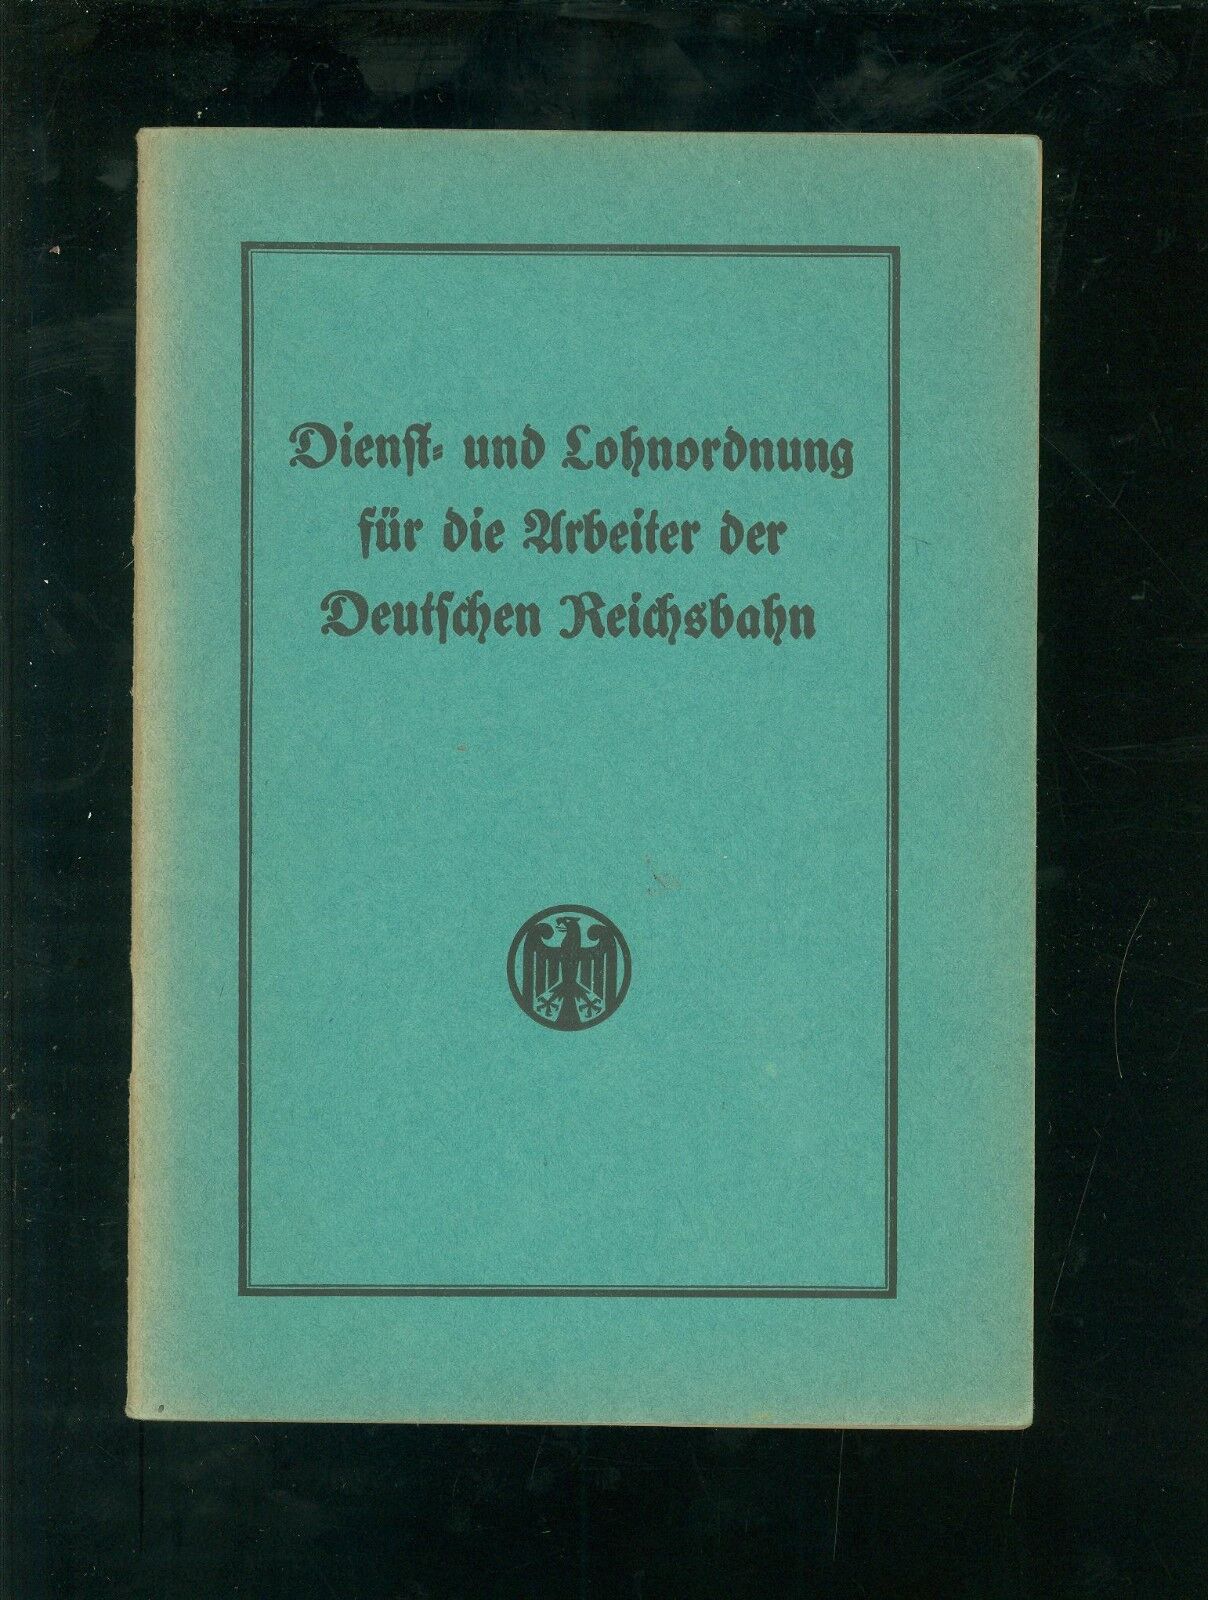 Service and Wage Regulations for the Workers of the Reichsbahn 1934